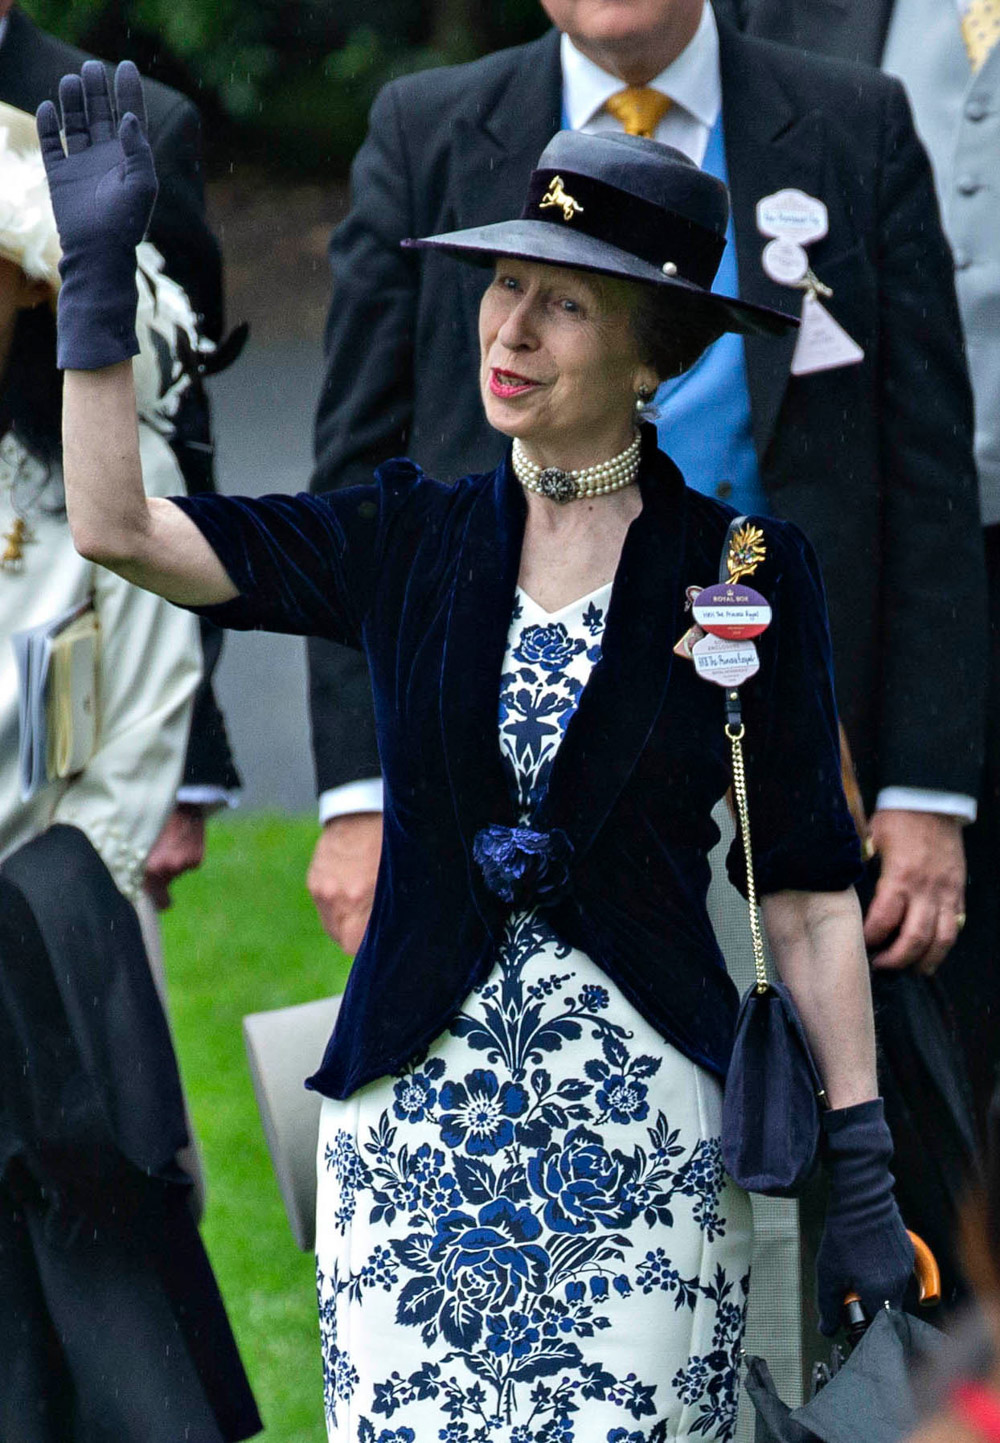 Princess Anne greets the Queen as she arrives at the Royal Carriages Royal Ascot, Day 2, UK - 19th June 2019